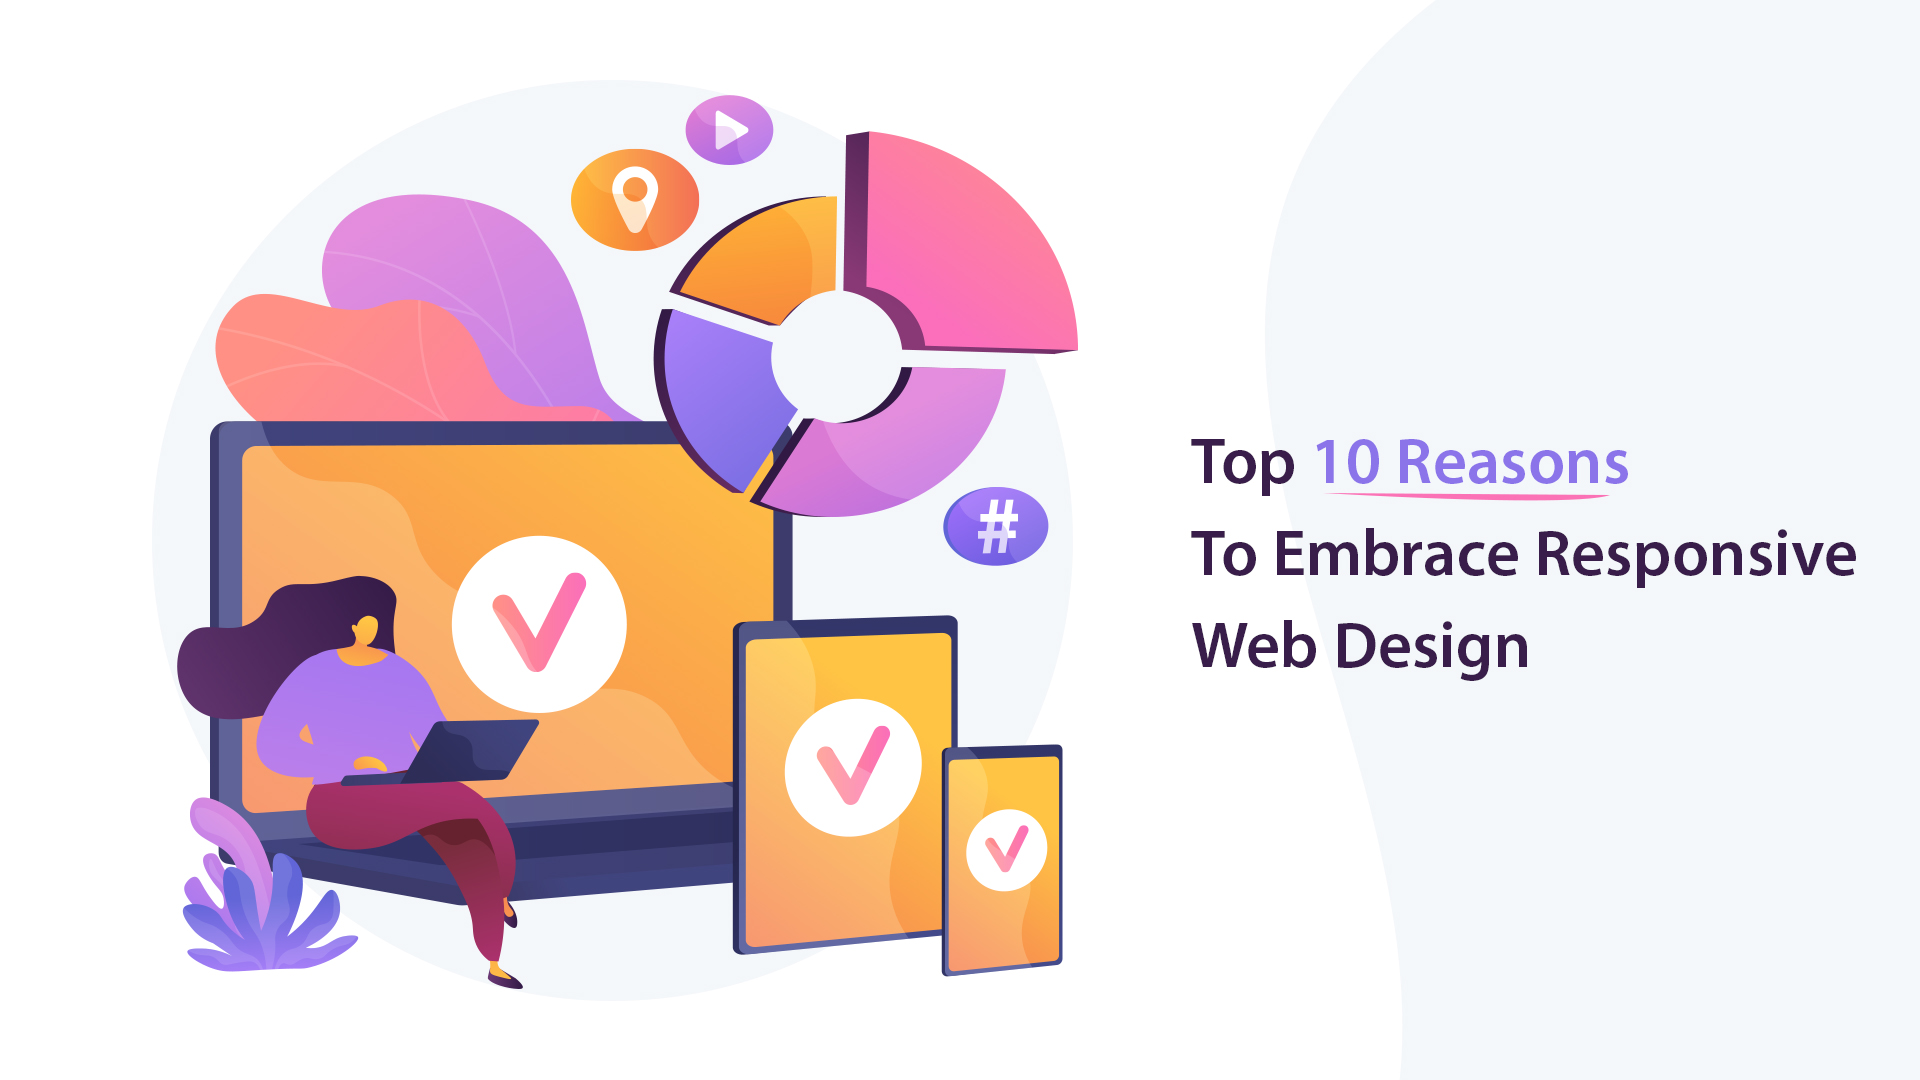 Top 10 Reasons To Embrace Responsive Web Design